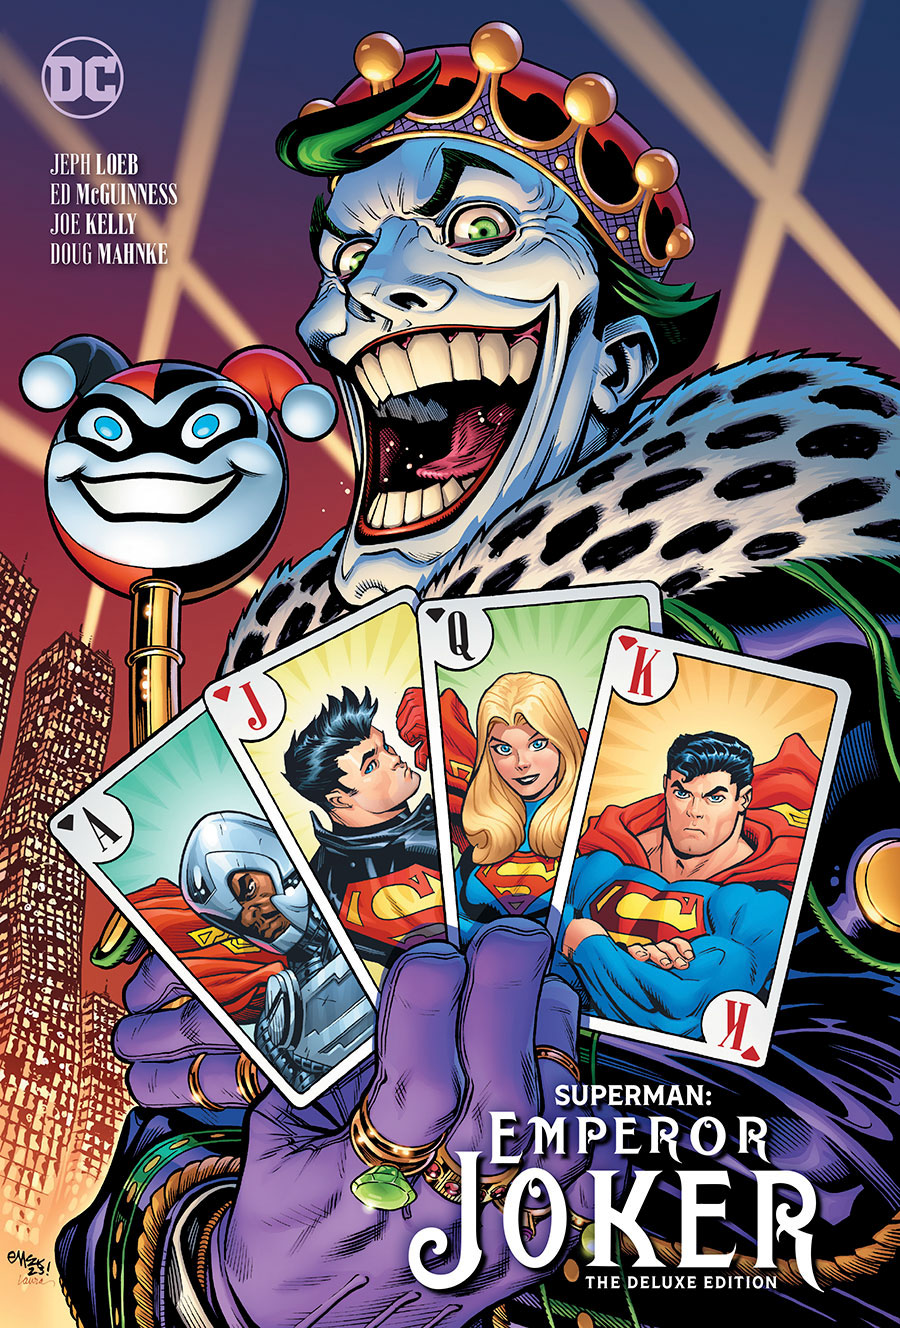 Superman Emperor Joker The Deluxe Edition HC Direct Market Exclusive Ed McGuinness Variant Edition